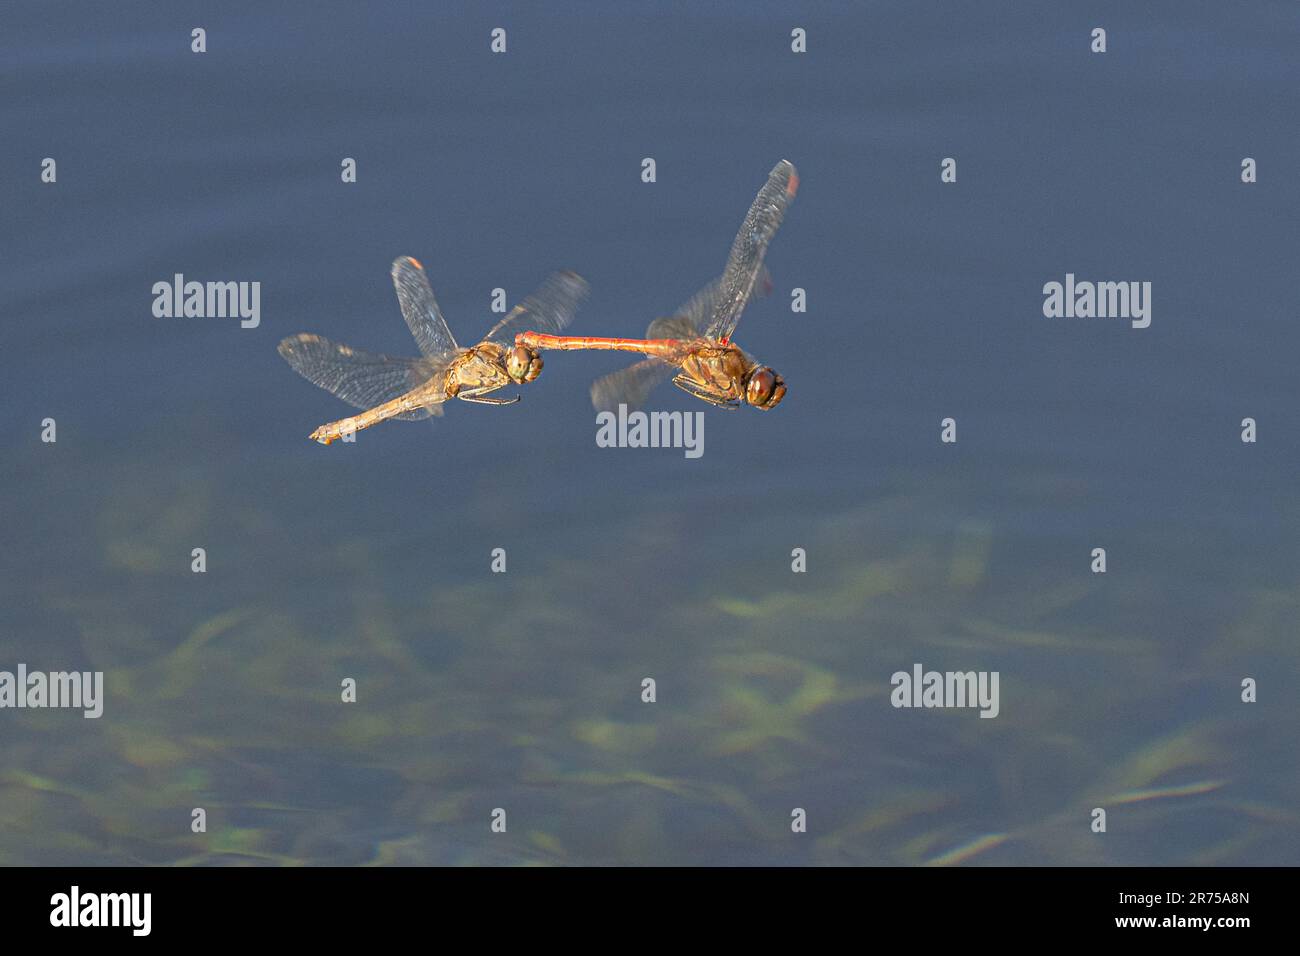 common sympetrum, common darter (Sympetrum striolatum), flying tandem before oviposition in mid-November, climate change, Germany, Bavaria Stock Photo